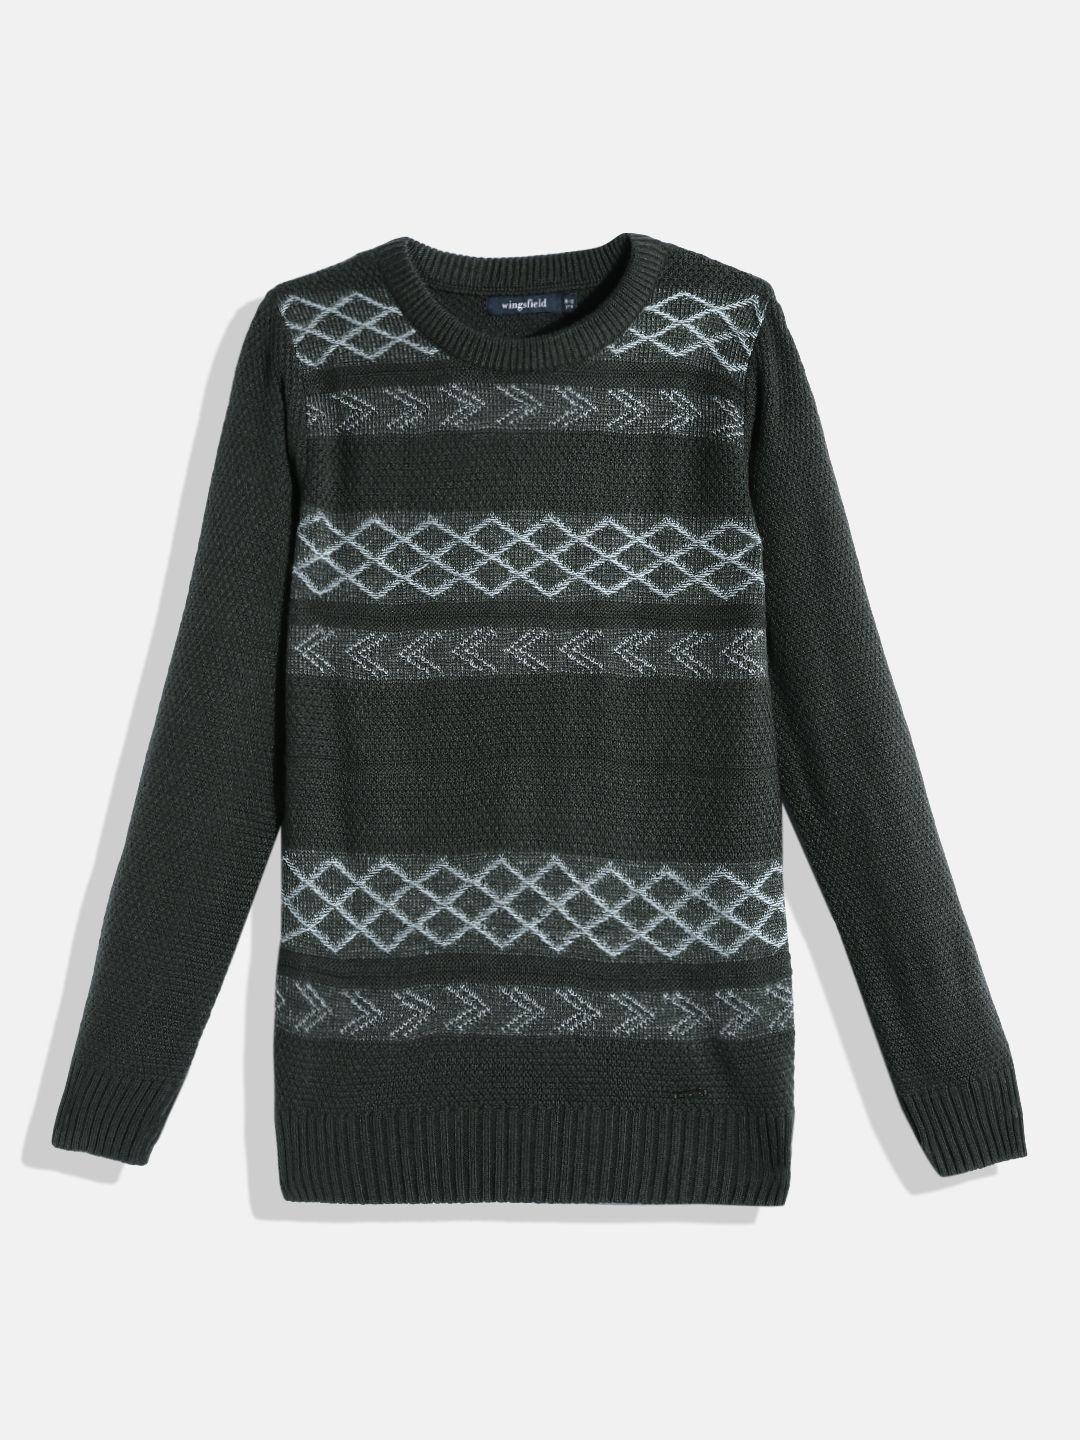 wingsfield-boys-charcoal-grey-&-white-self-design-acrylic-pullover